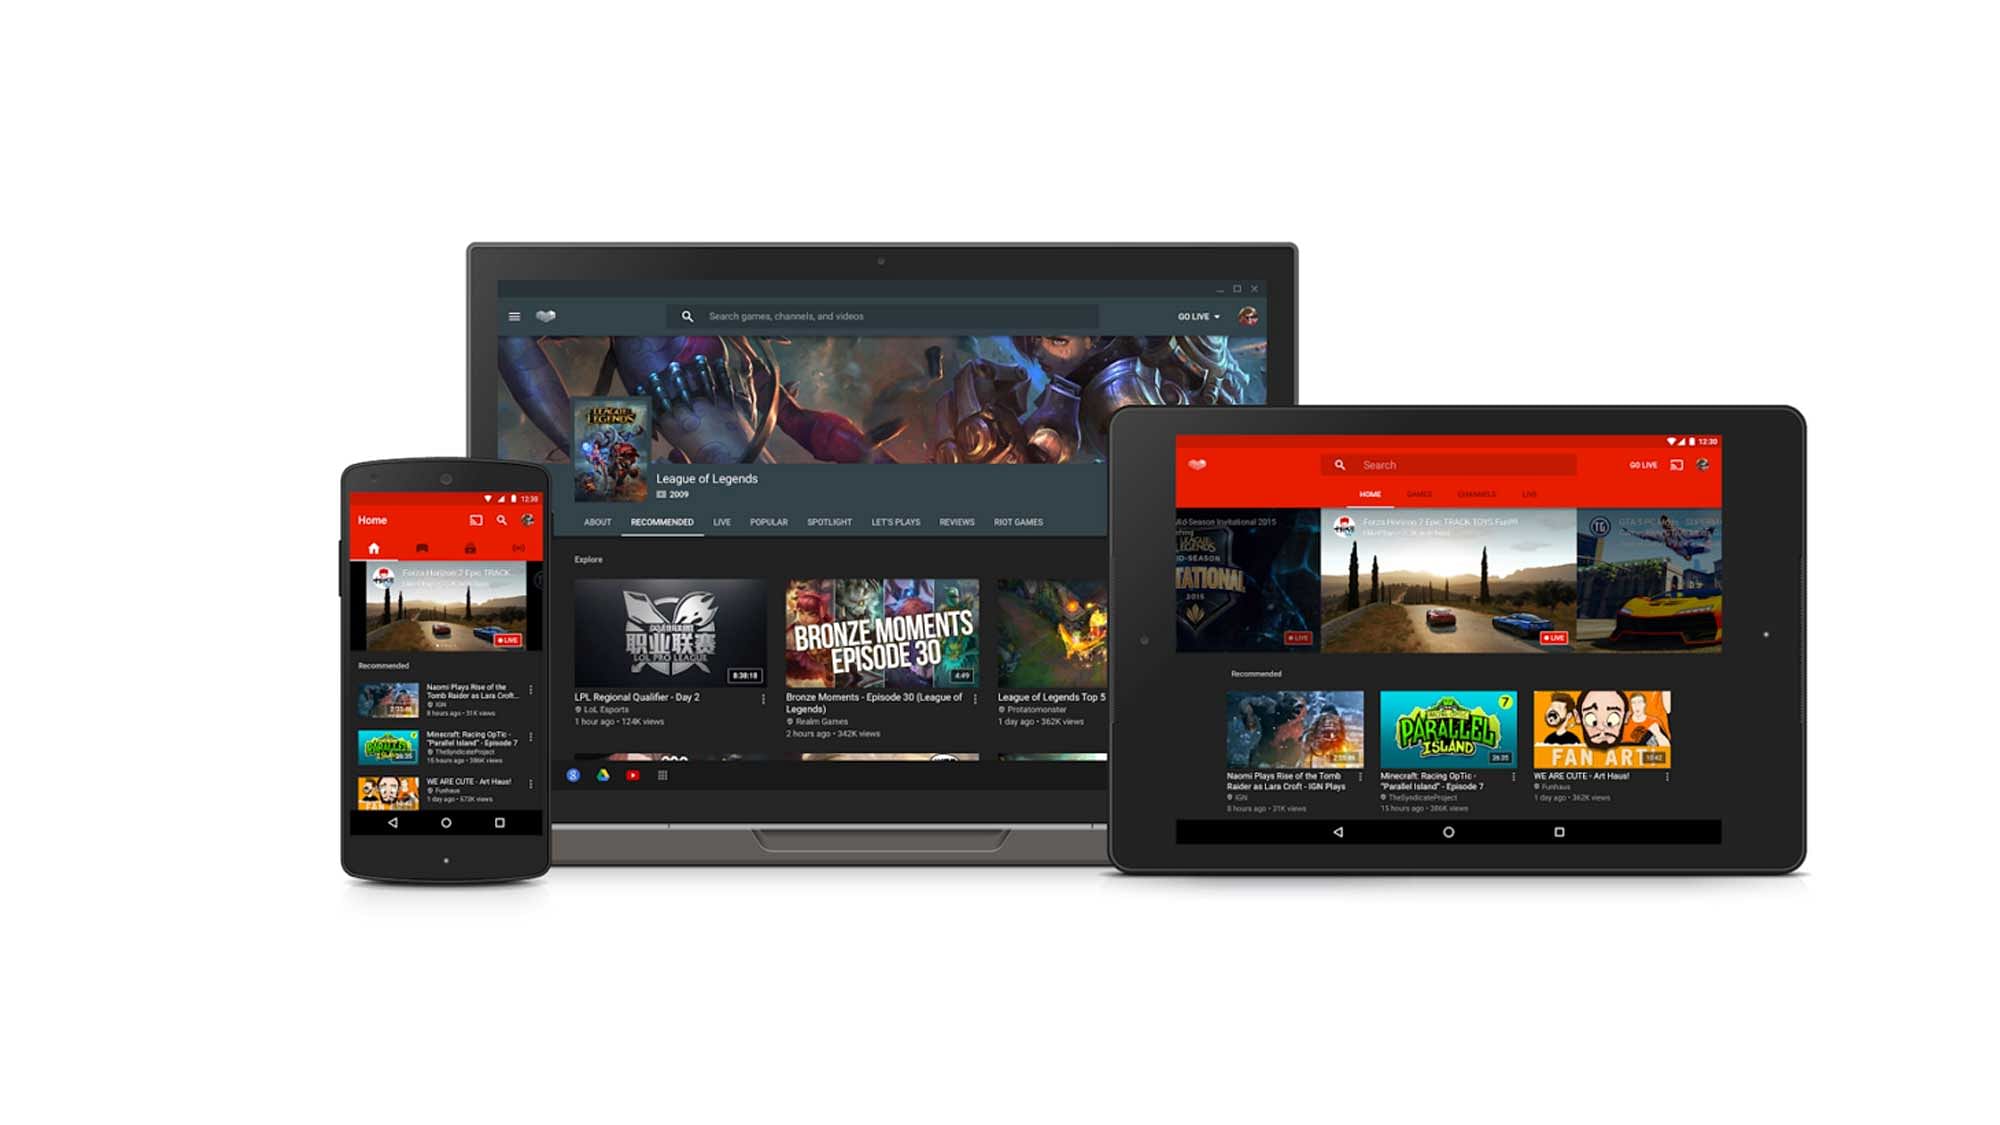 Youtube Gaming earlier was a standalone application.